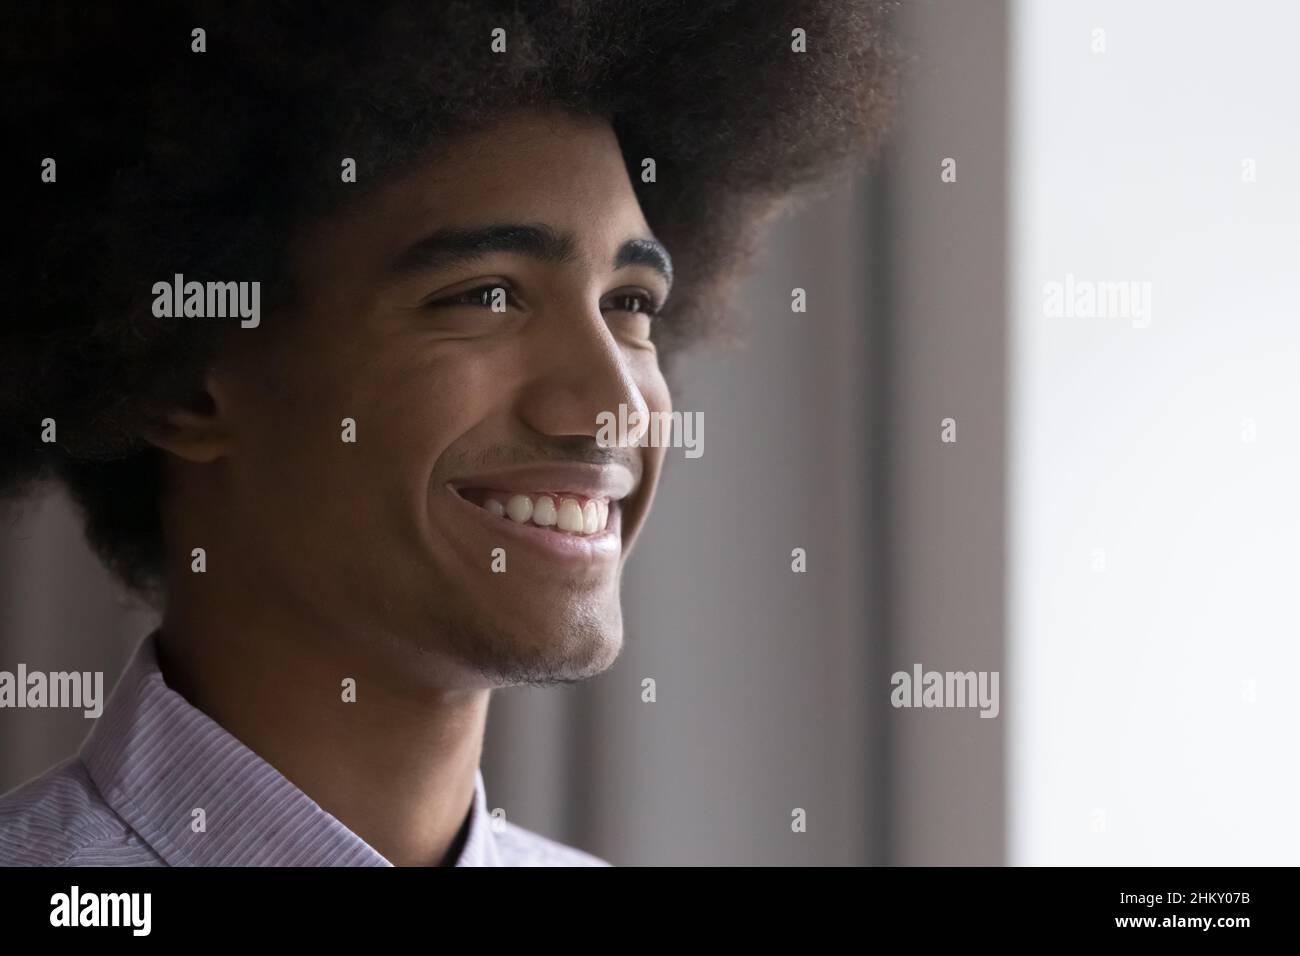 Happy African teenage guy with retro Afro hairstyle looking away Stock Photo